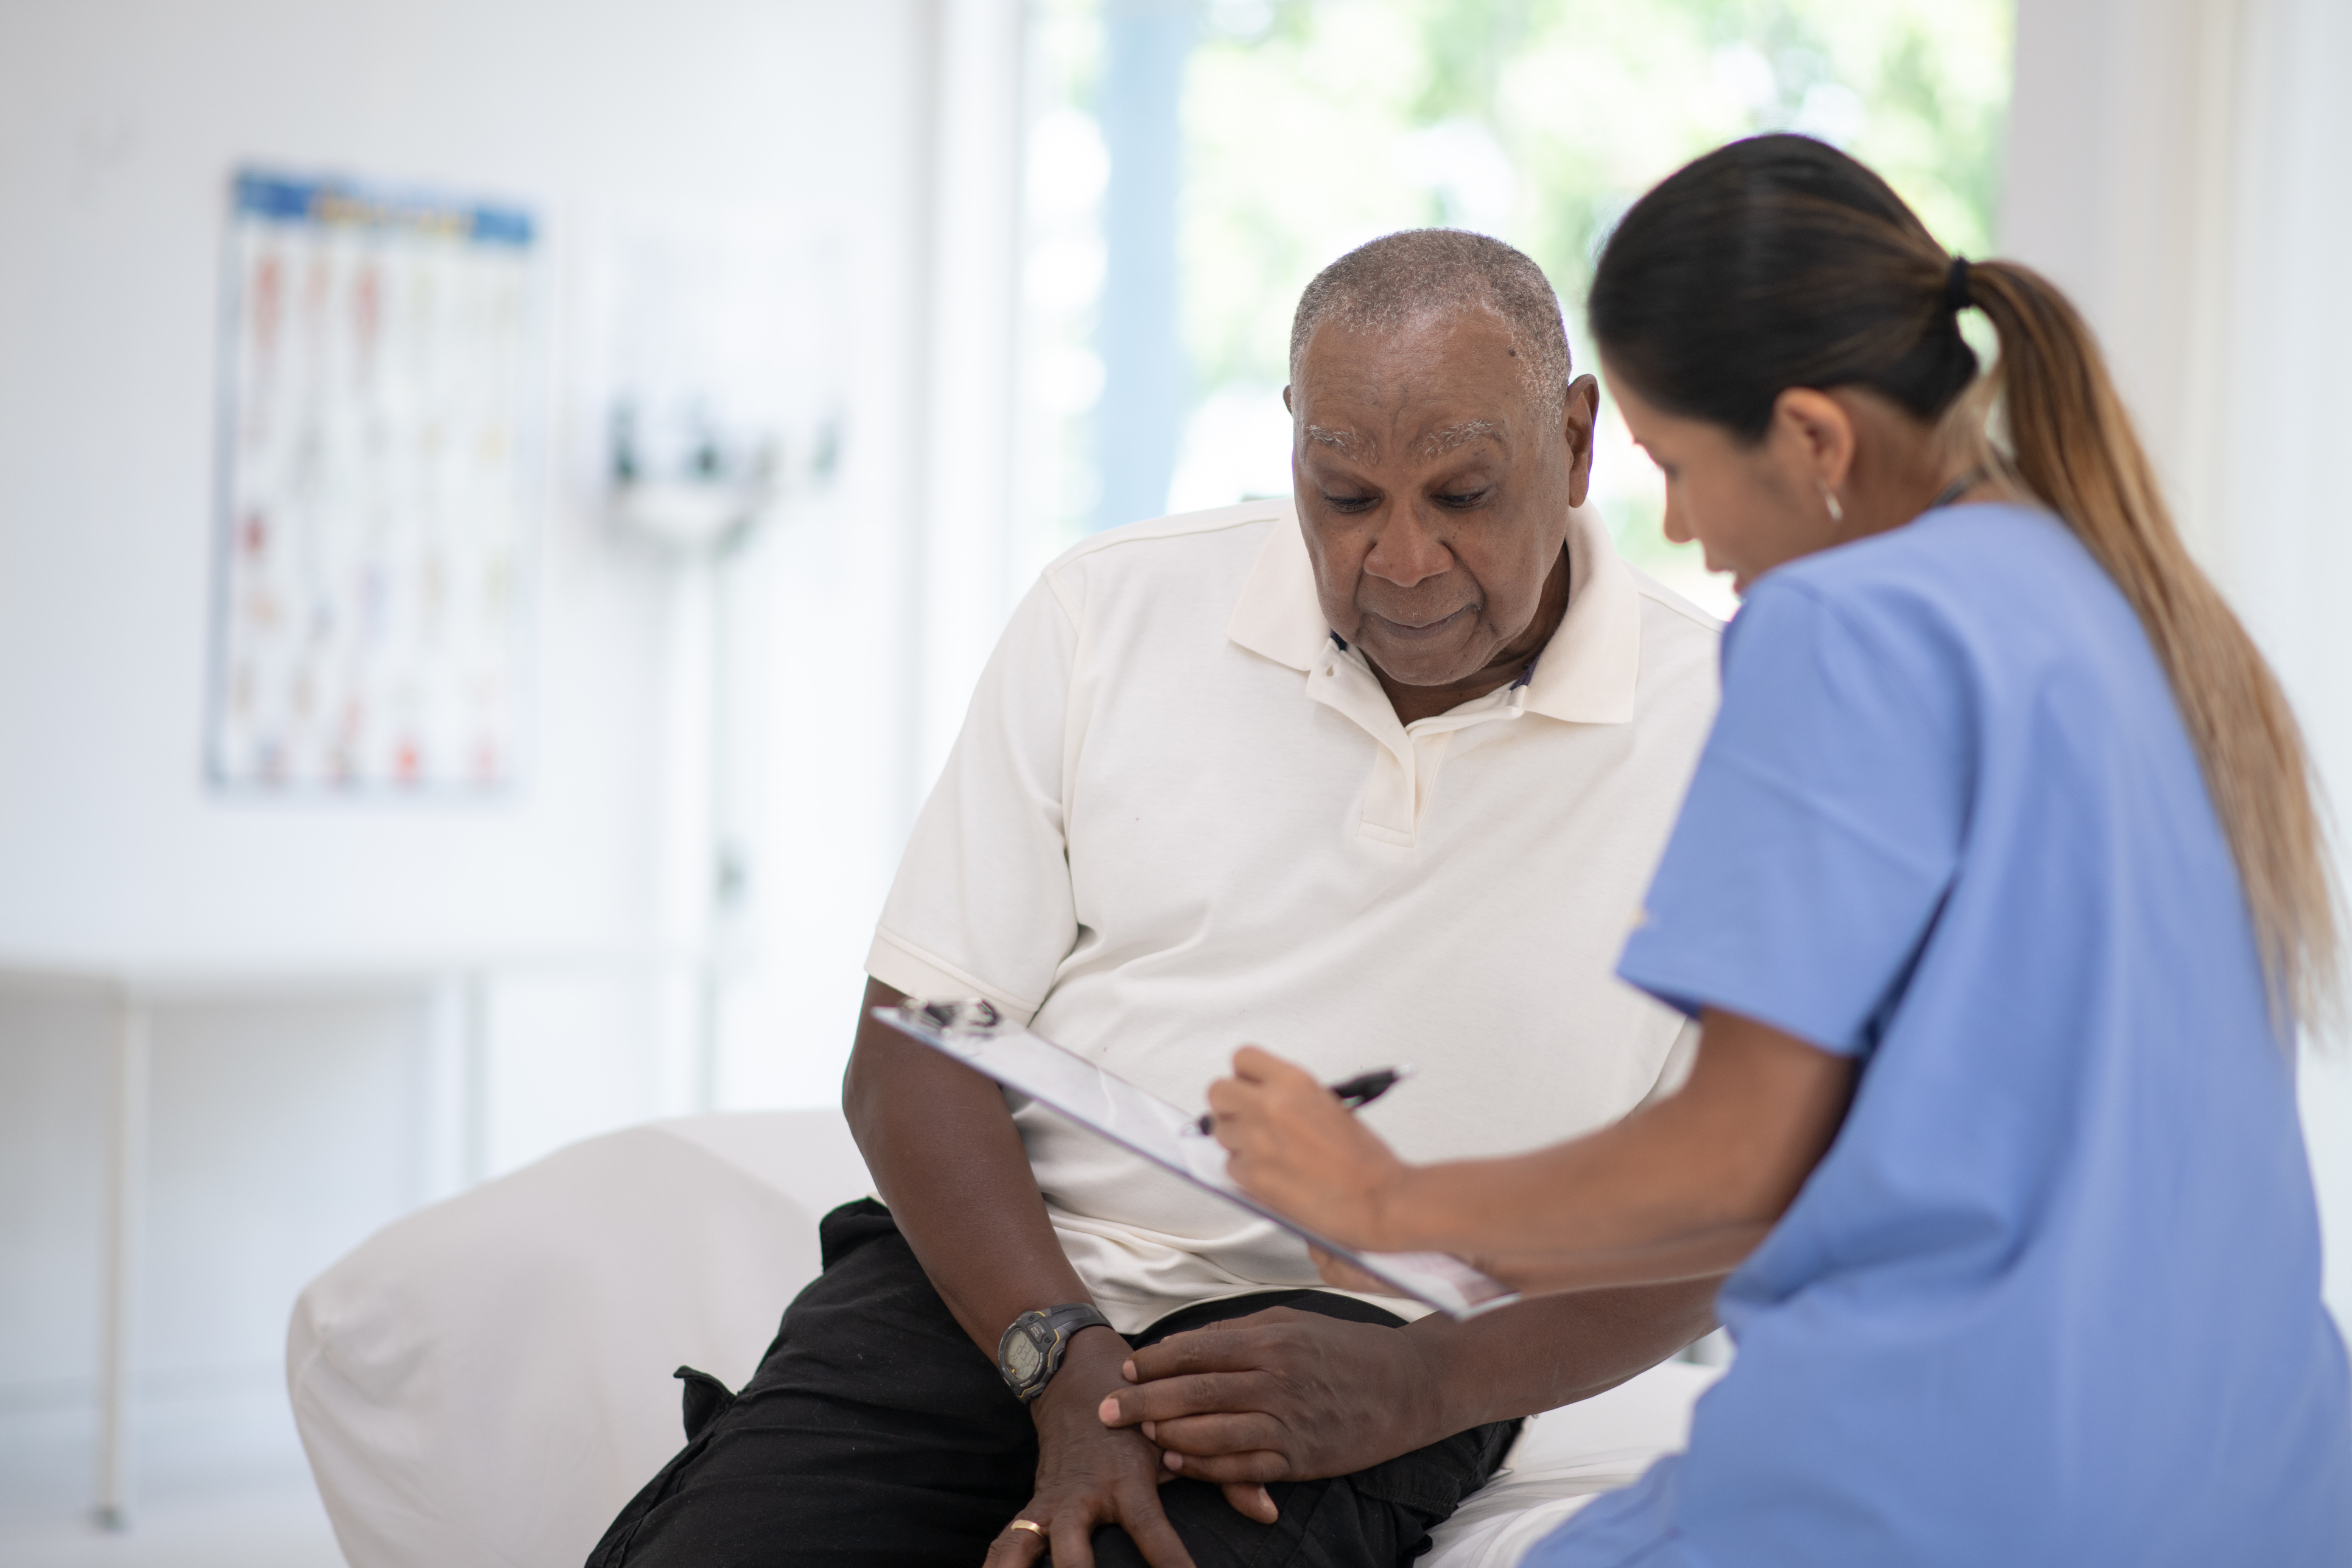 Black patients more likely to be excluded from pancreatic cancer